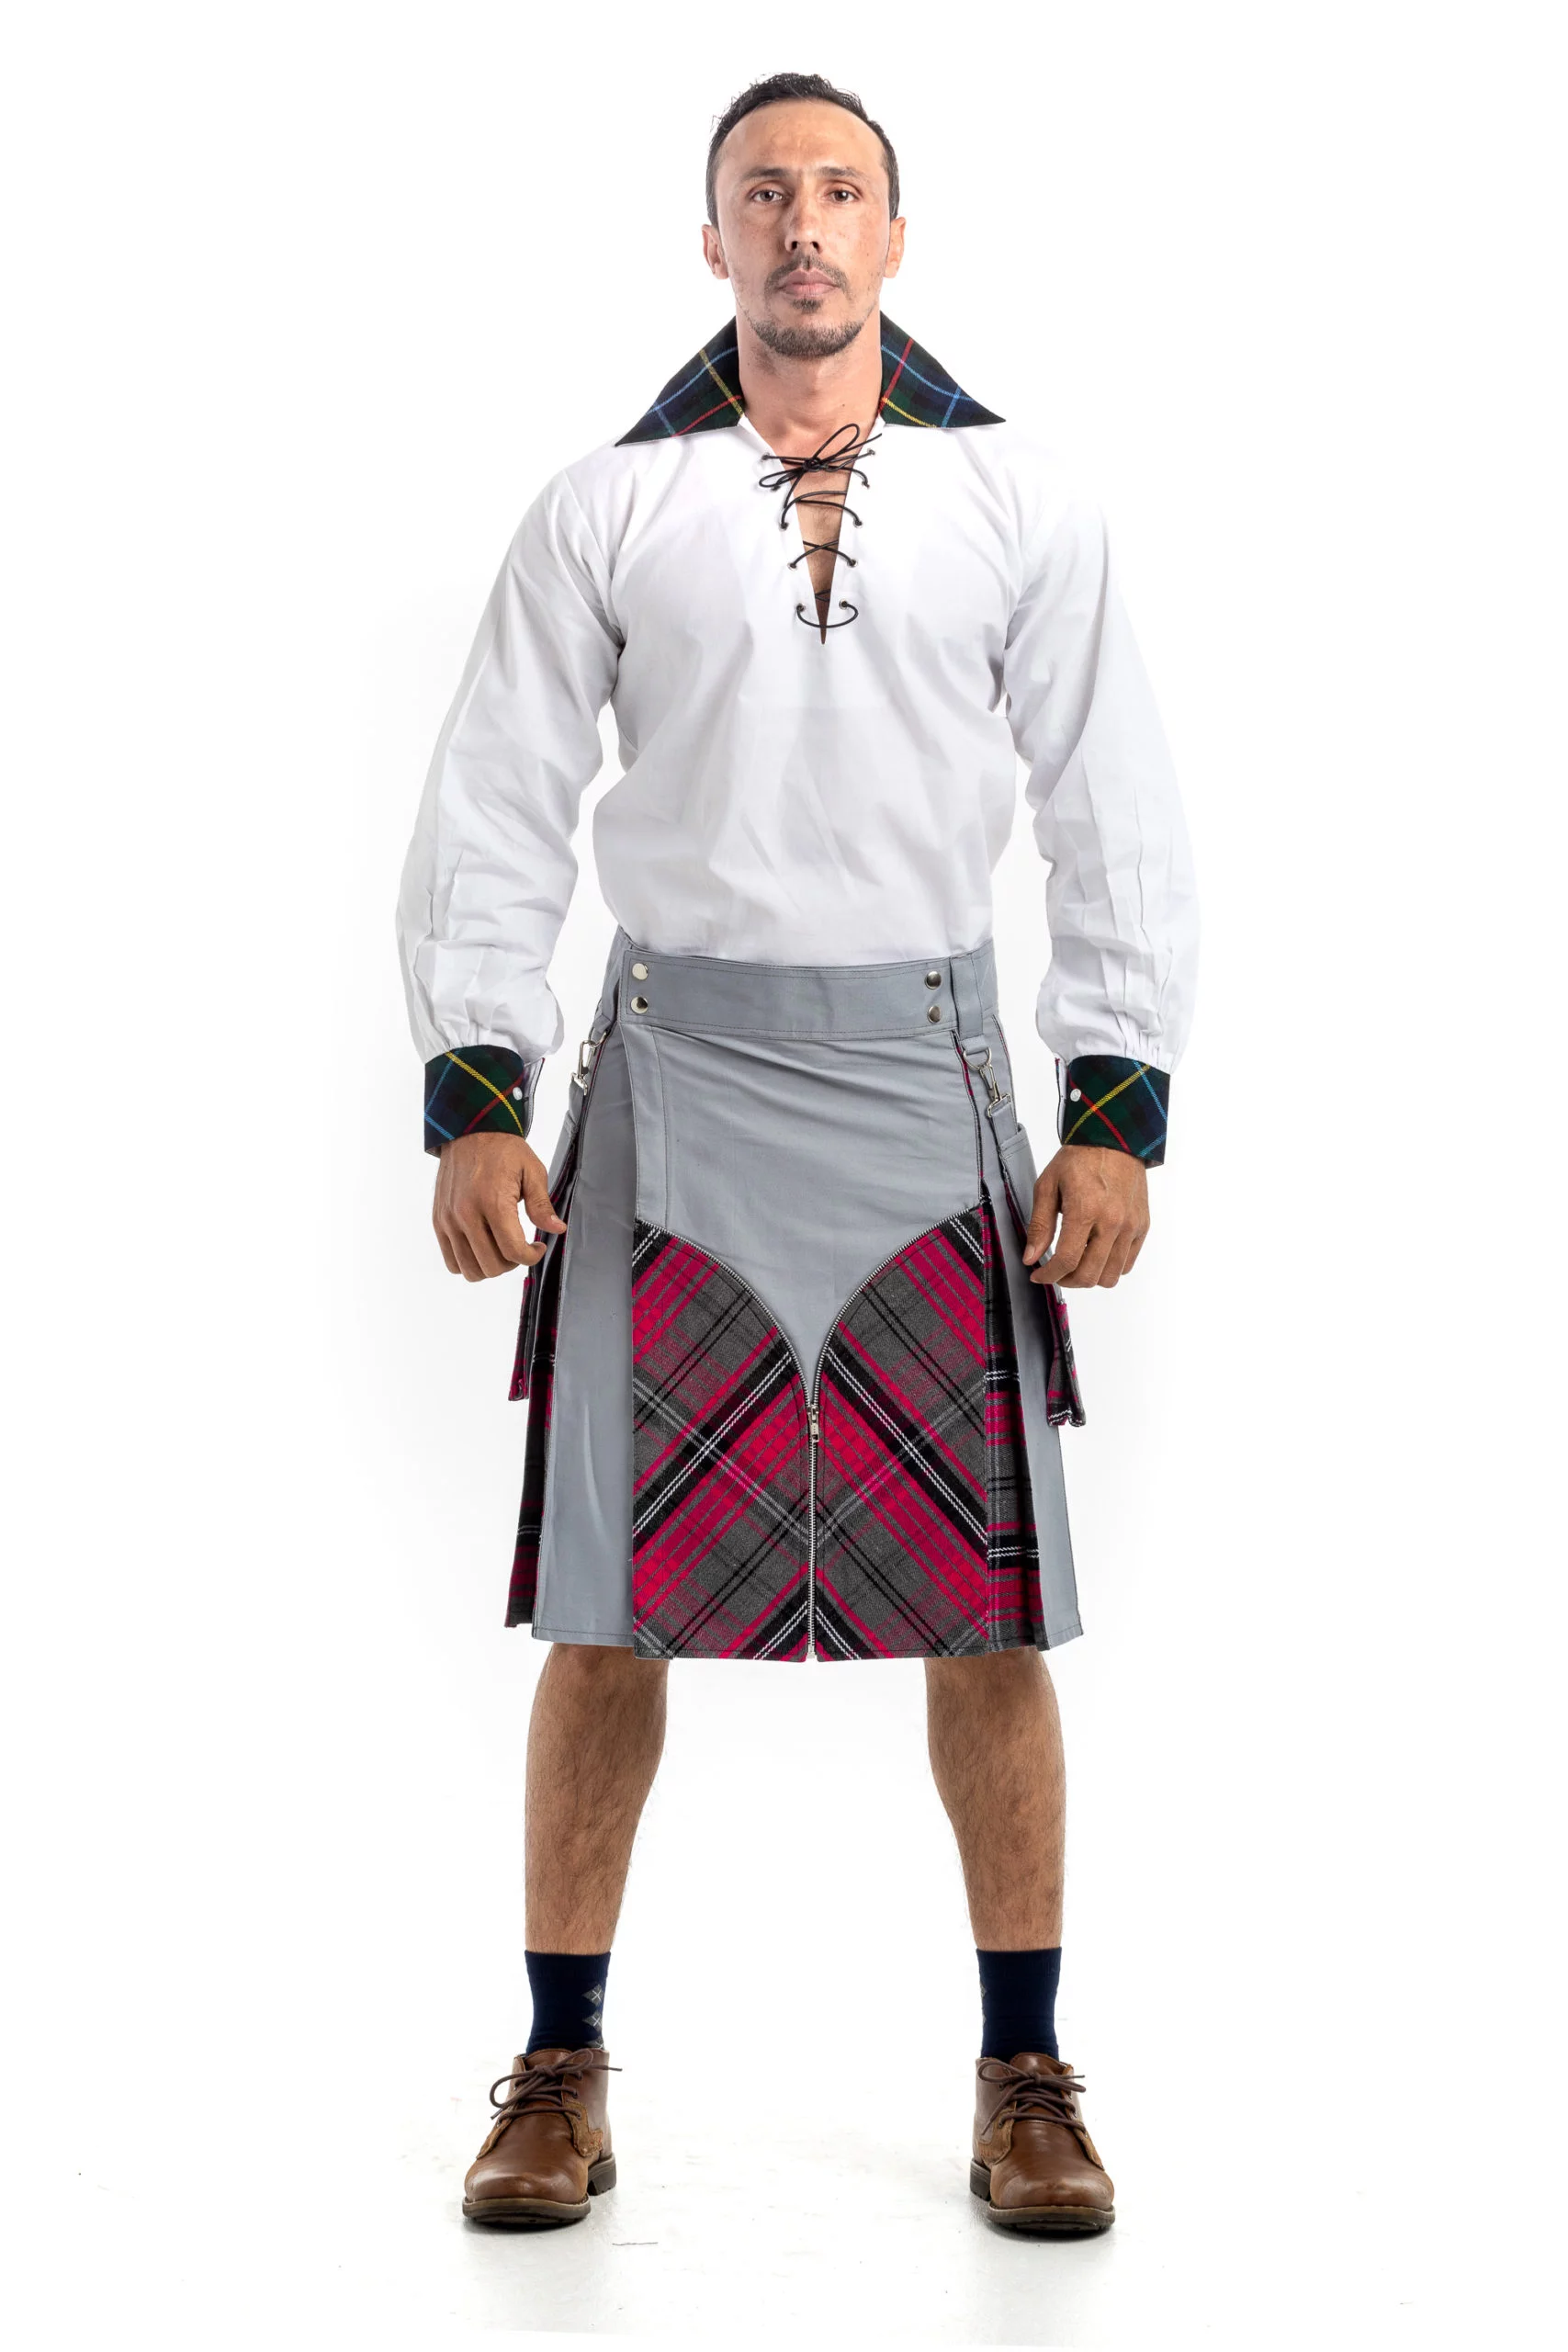 Shirts to wear with kilts